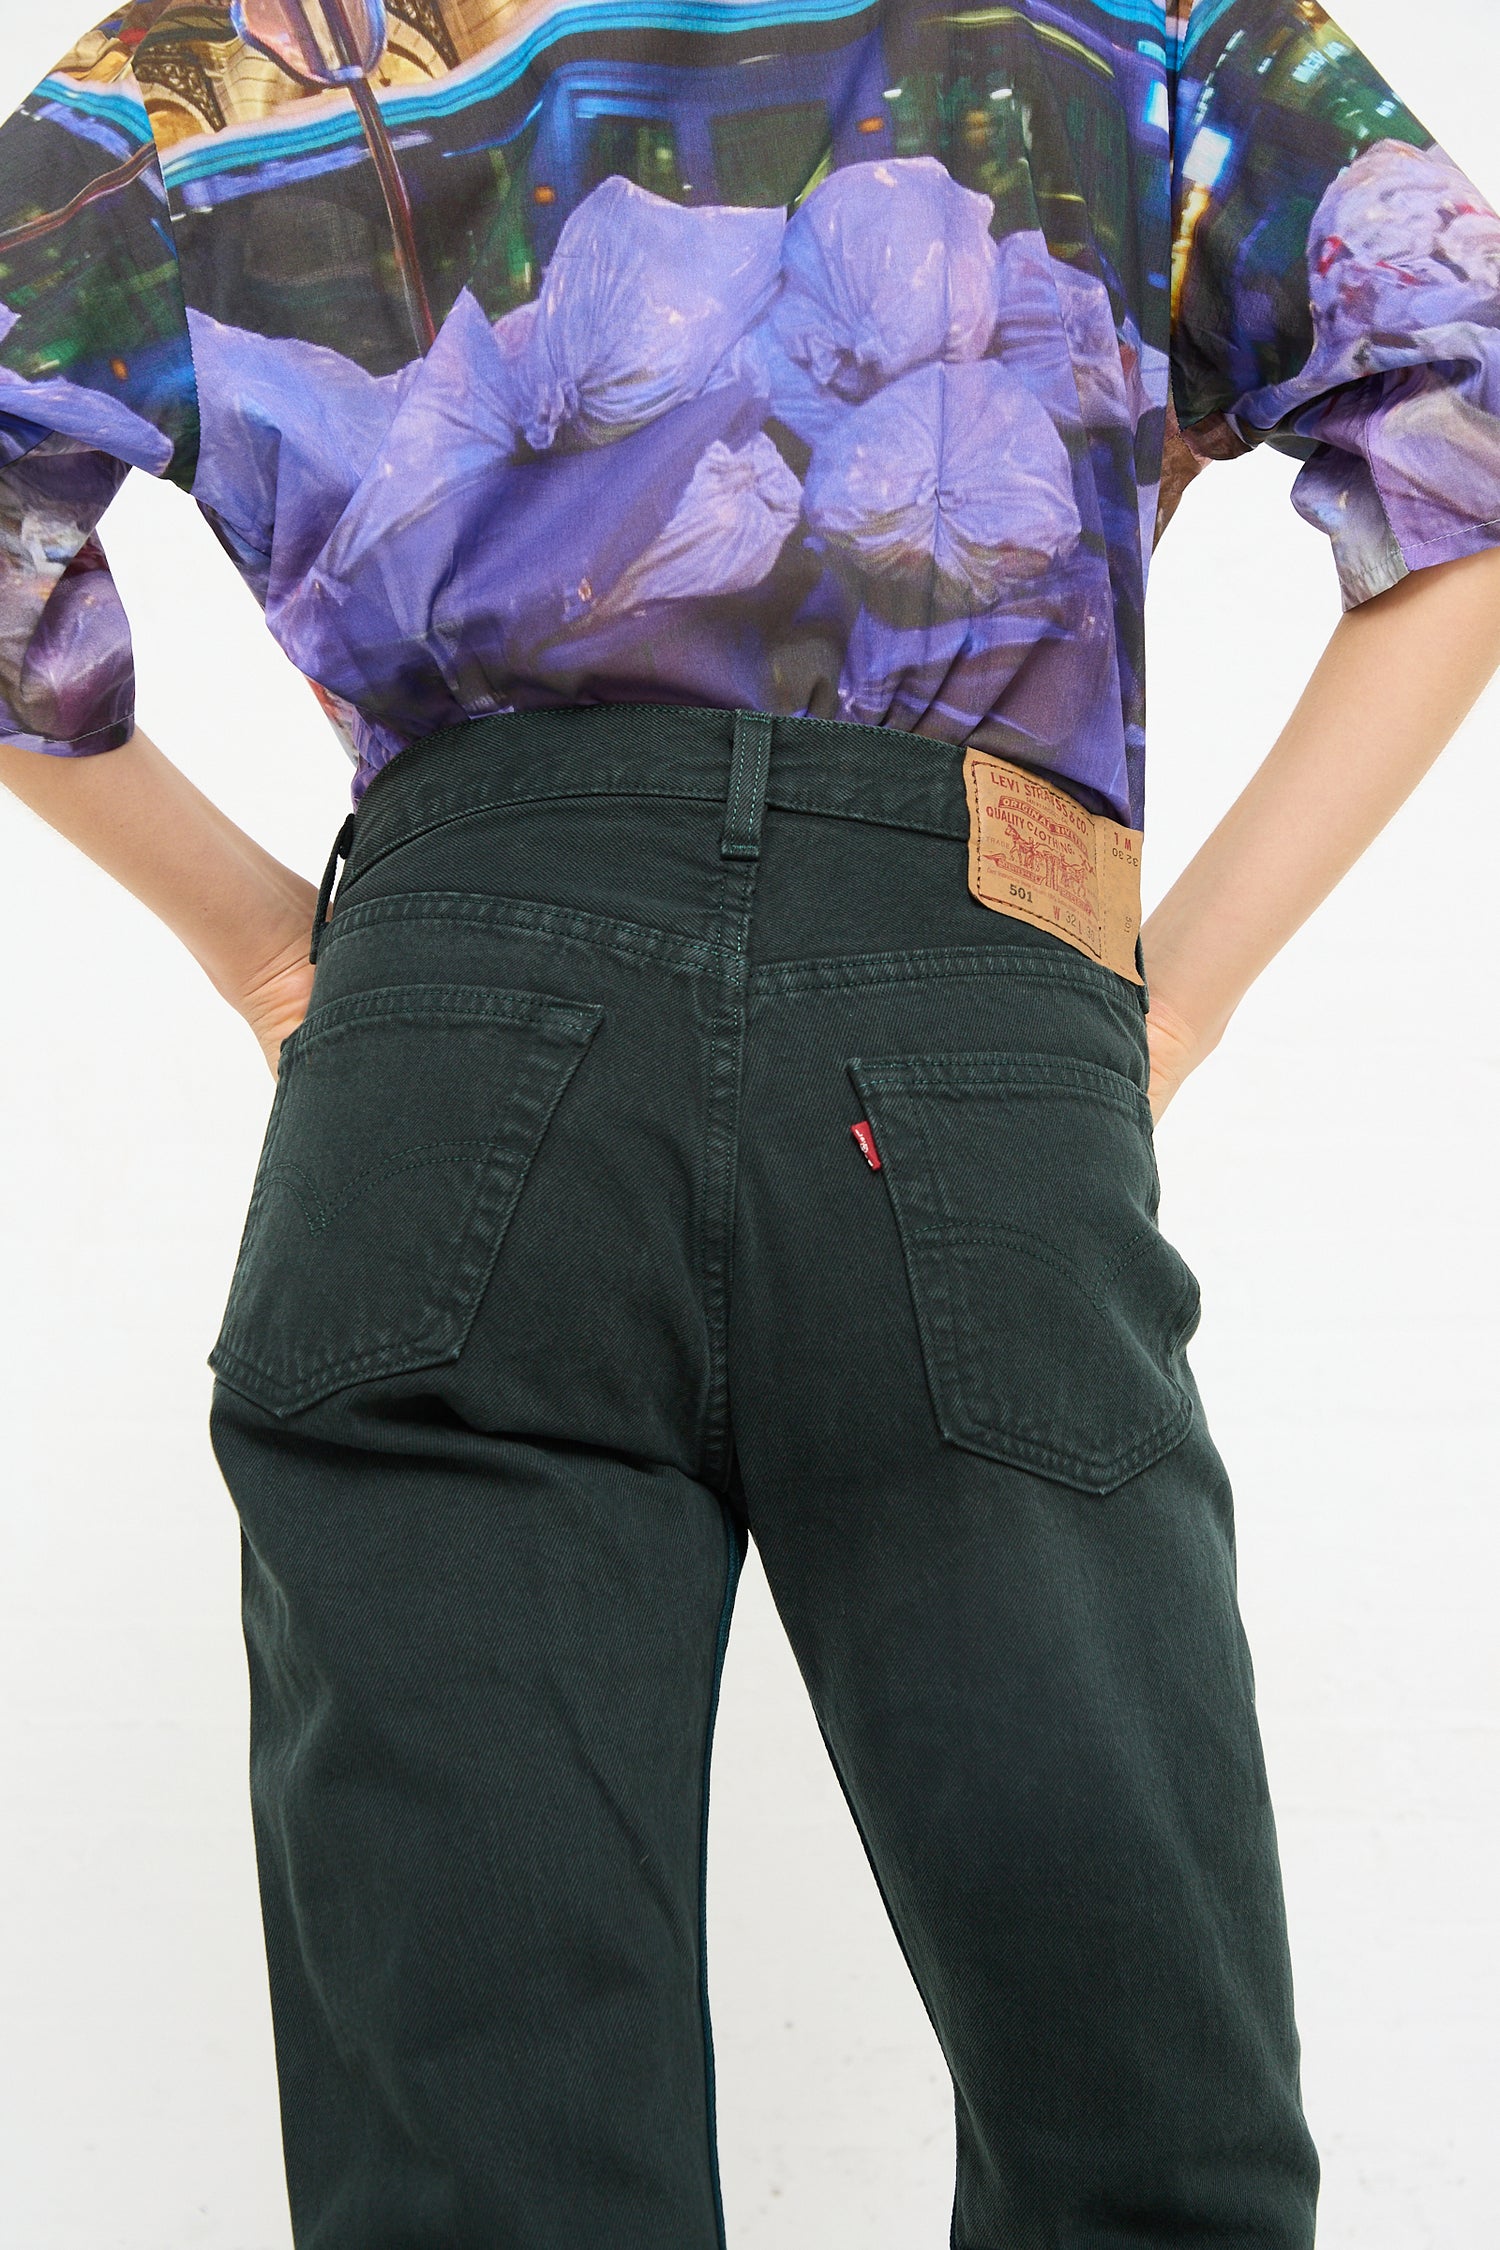 Person wearing green, Bless No. 73 Jeanspleatfront in Dark Teal/Grey and a floral print shirt from the waist to mid-back view.